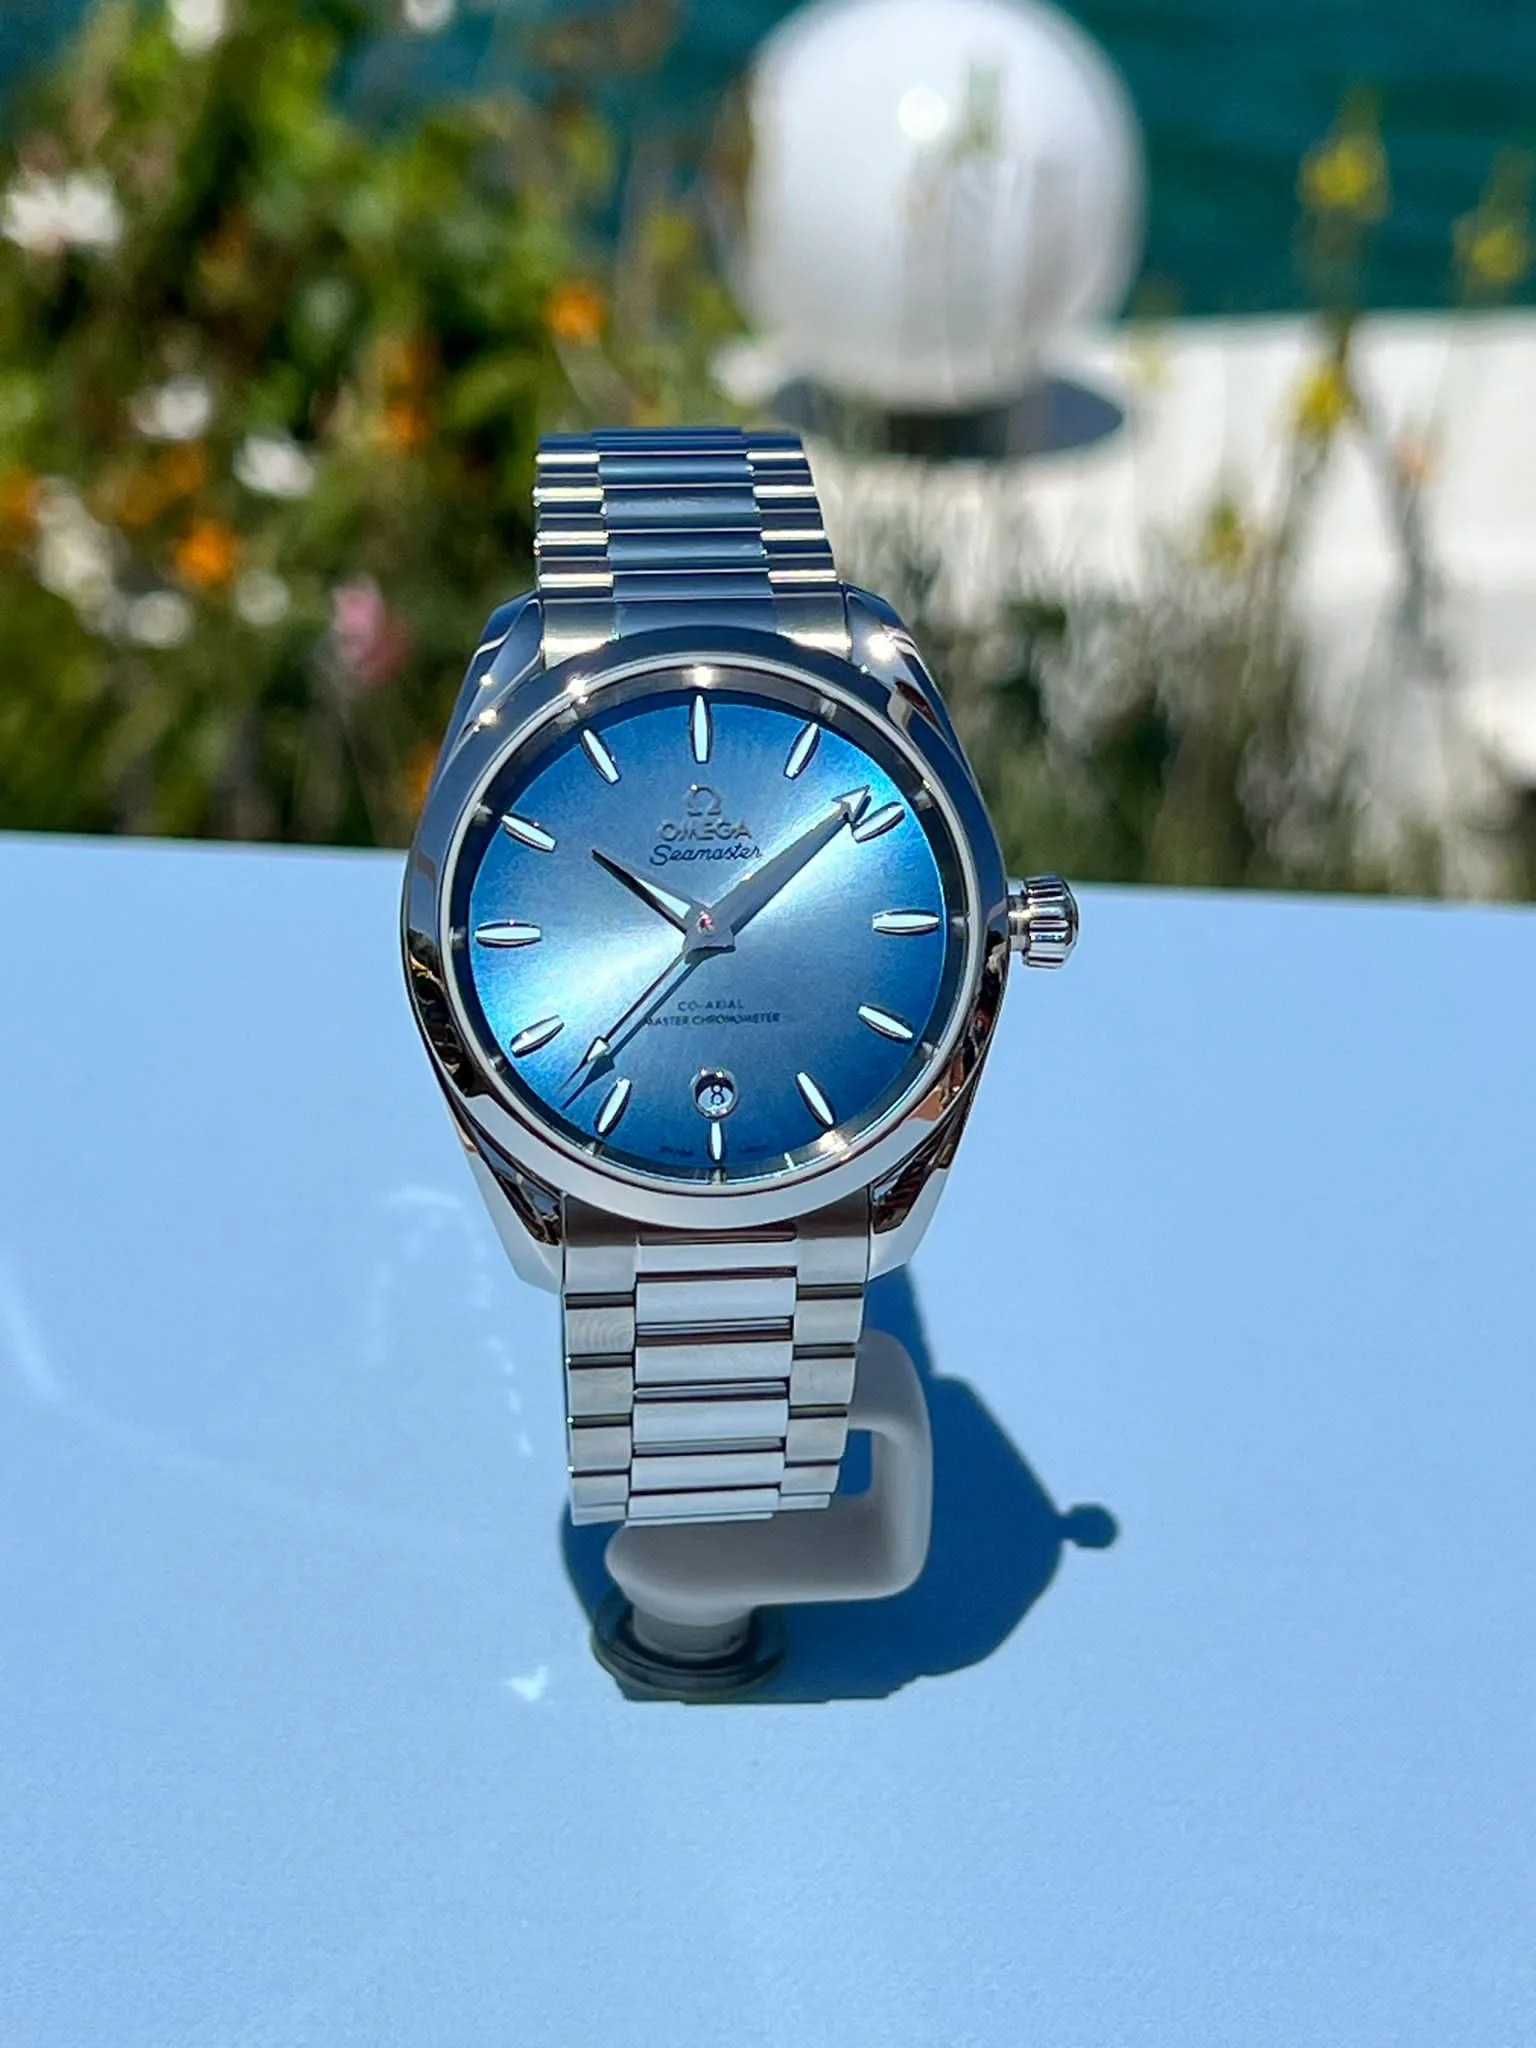 The new Aqua Terra 38 is Omega's Rolex Oyster Perpetual fighter